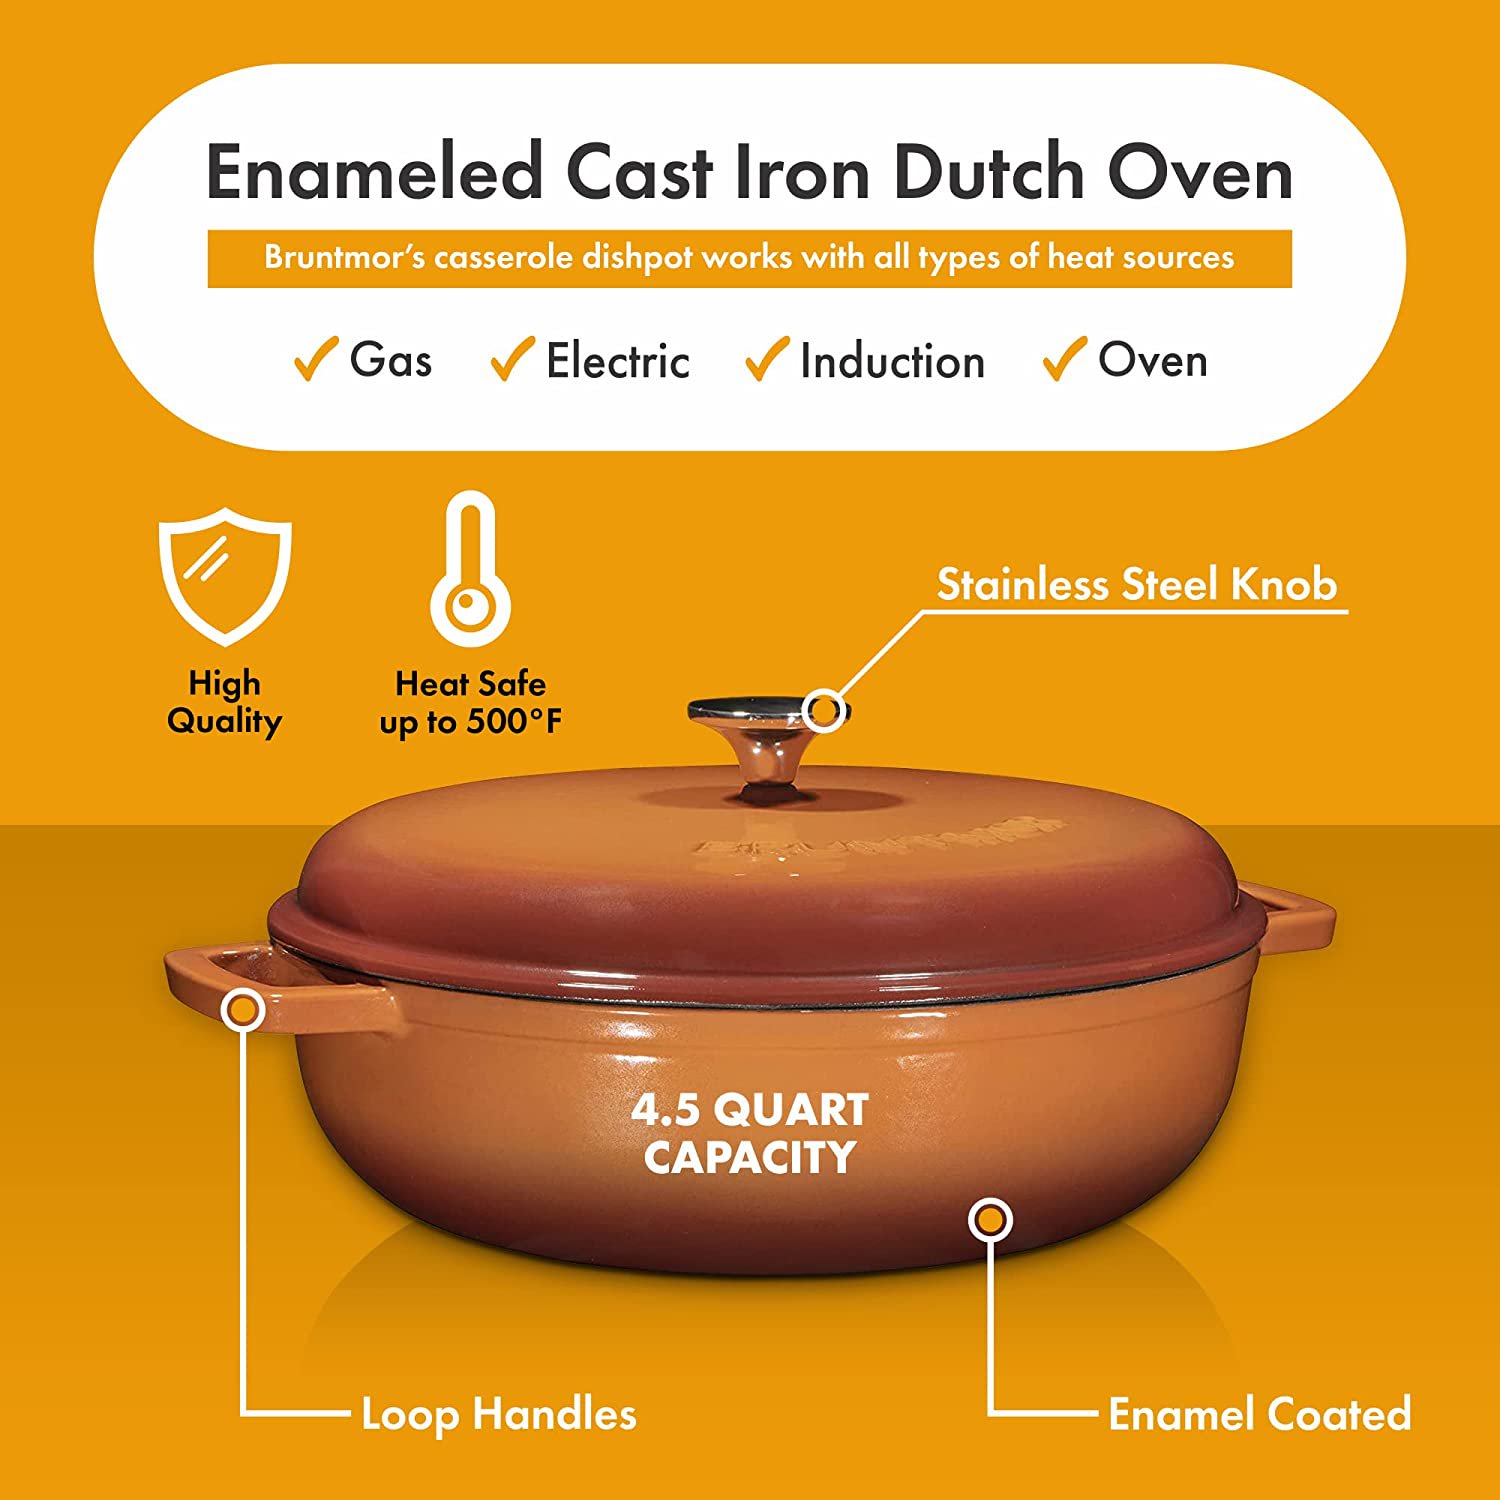 https://discounttoday.net/wp-content/uploads/2022/12/Bruntmor-Enameled-Cast-Iron-Dutch-Oven-With-Lid-And-Stainless-Steel-Knob-455.jpeg